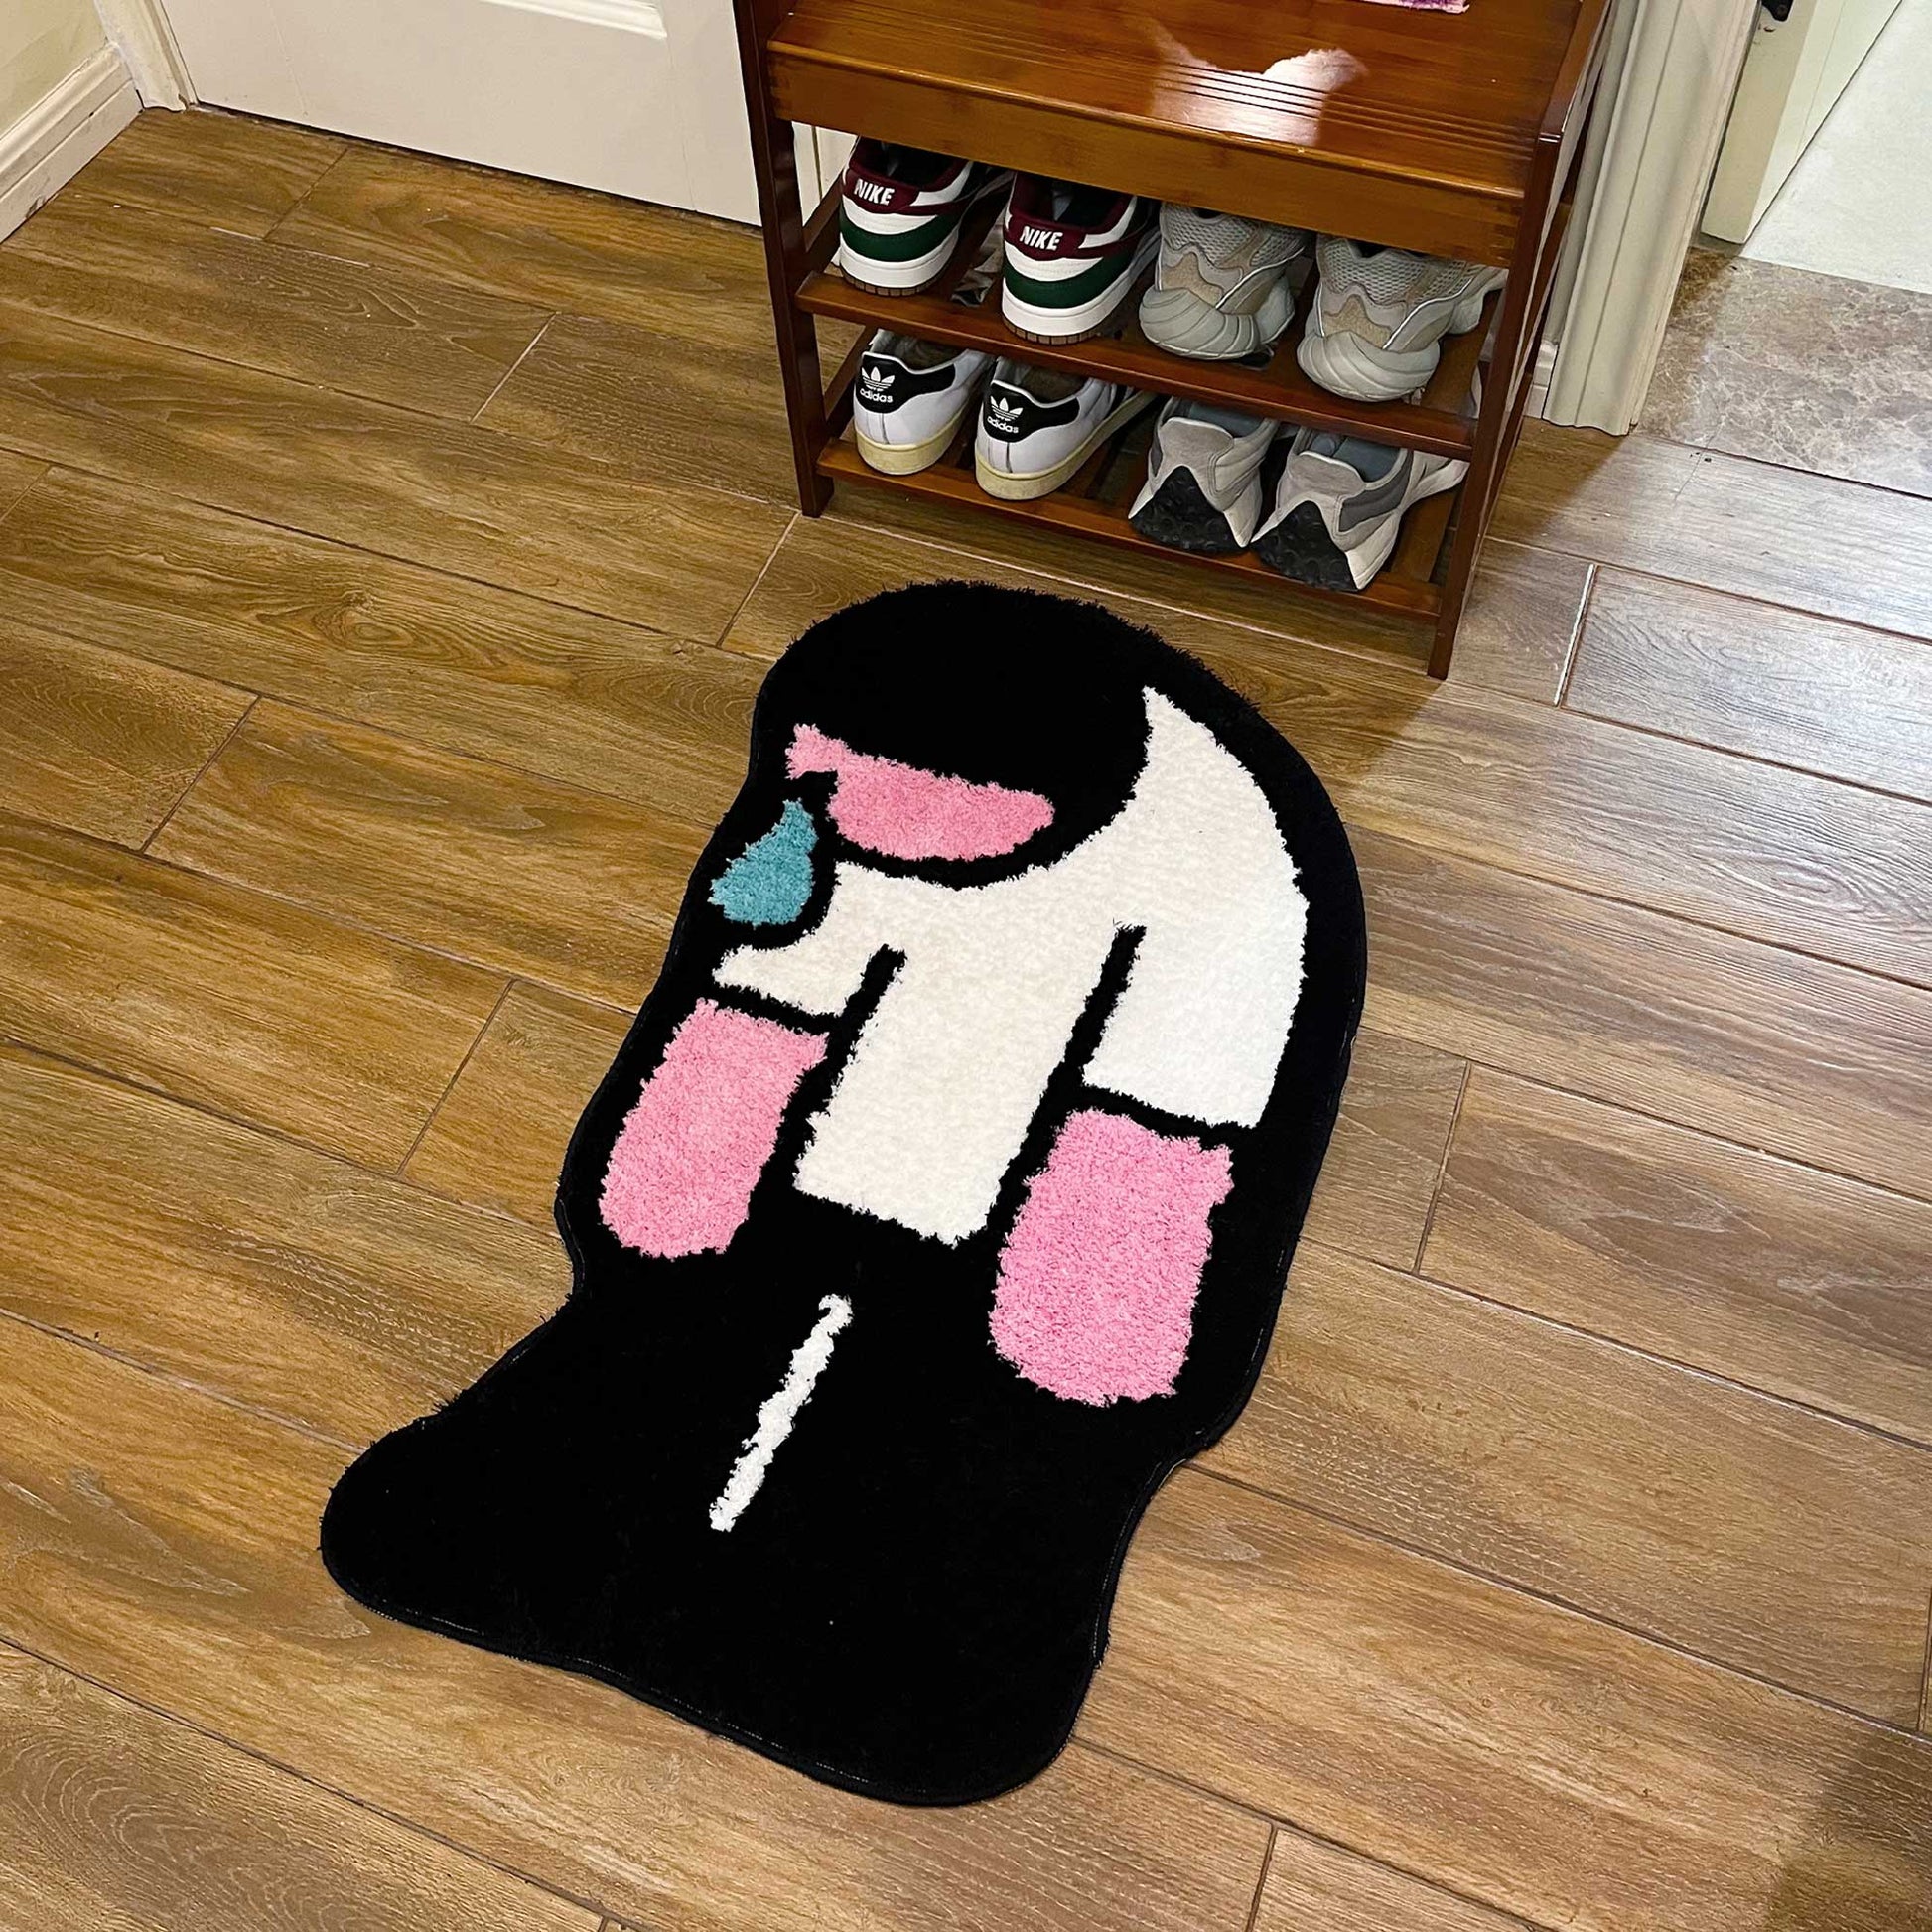 Tufted Rug Sad Man Rug Front in an Entryway